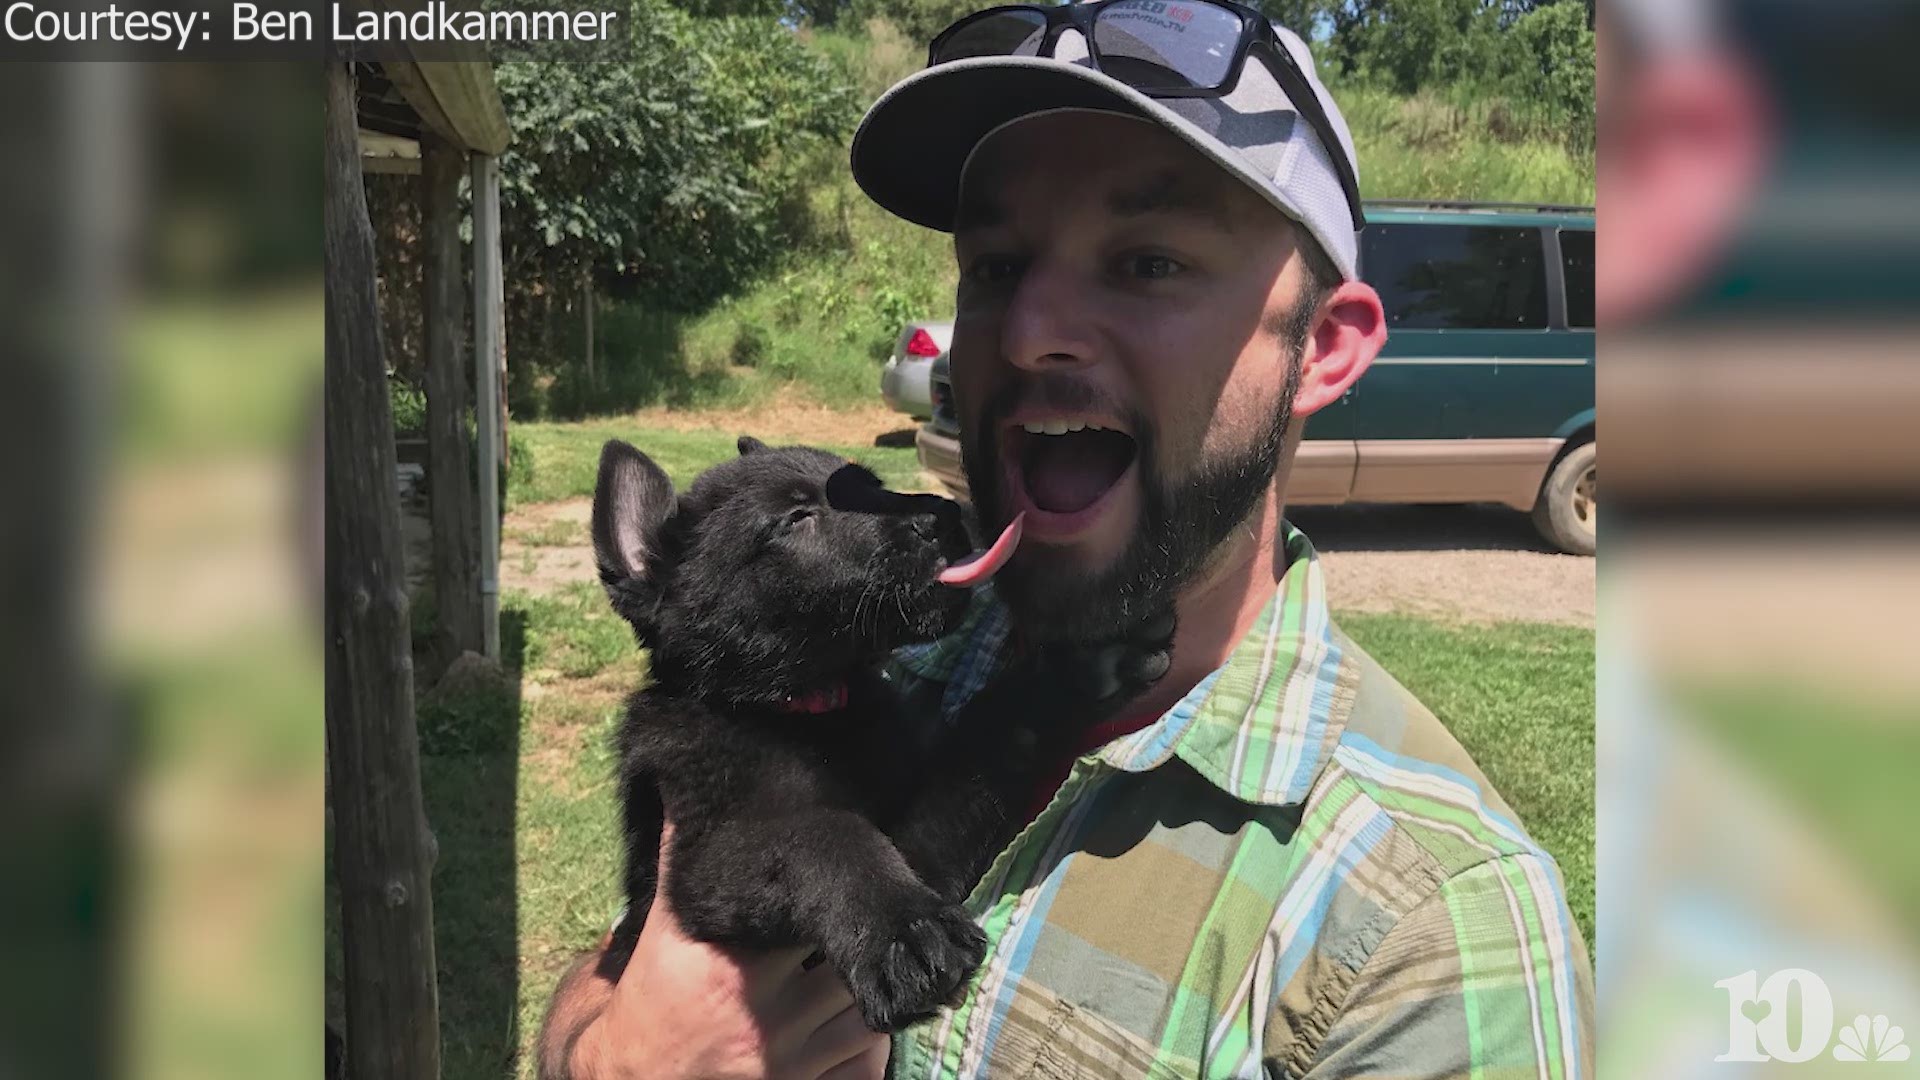 Kato and his handler, Ben Landkammer, are the K-9 unit for BUSAR, the volunteer search and rescue team that deploys in the Great Smoky Mountains.